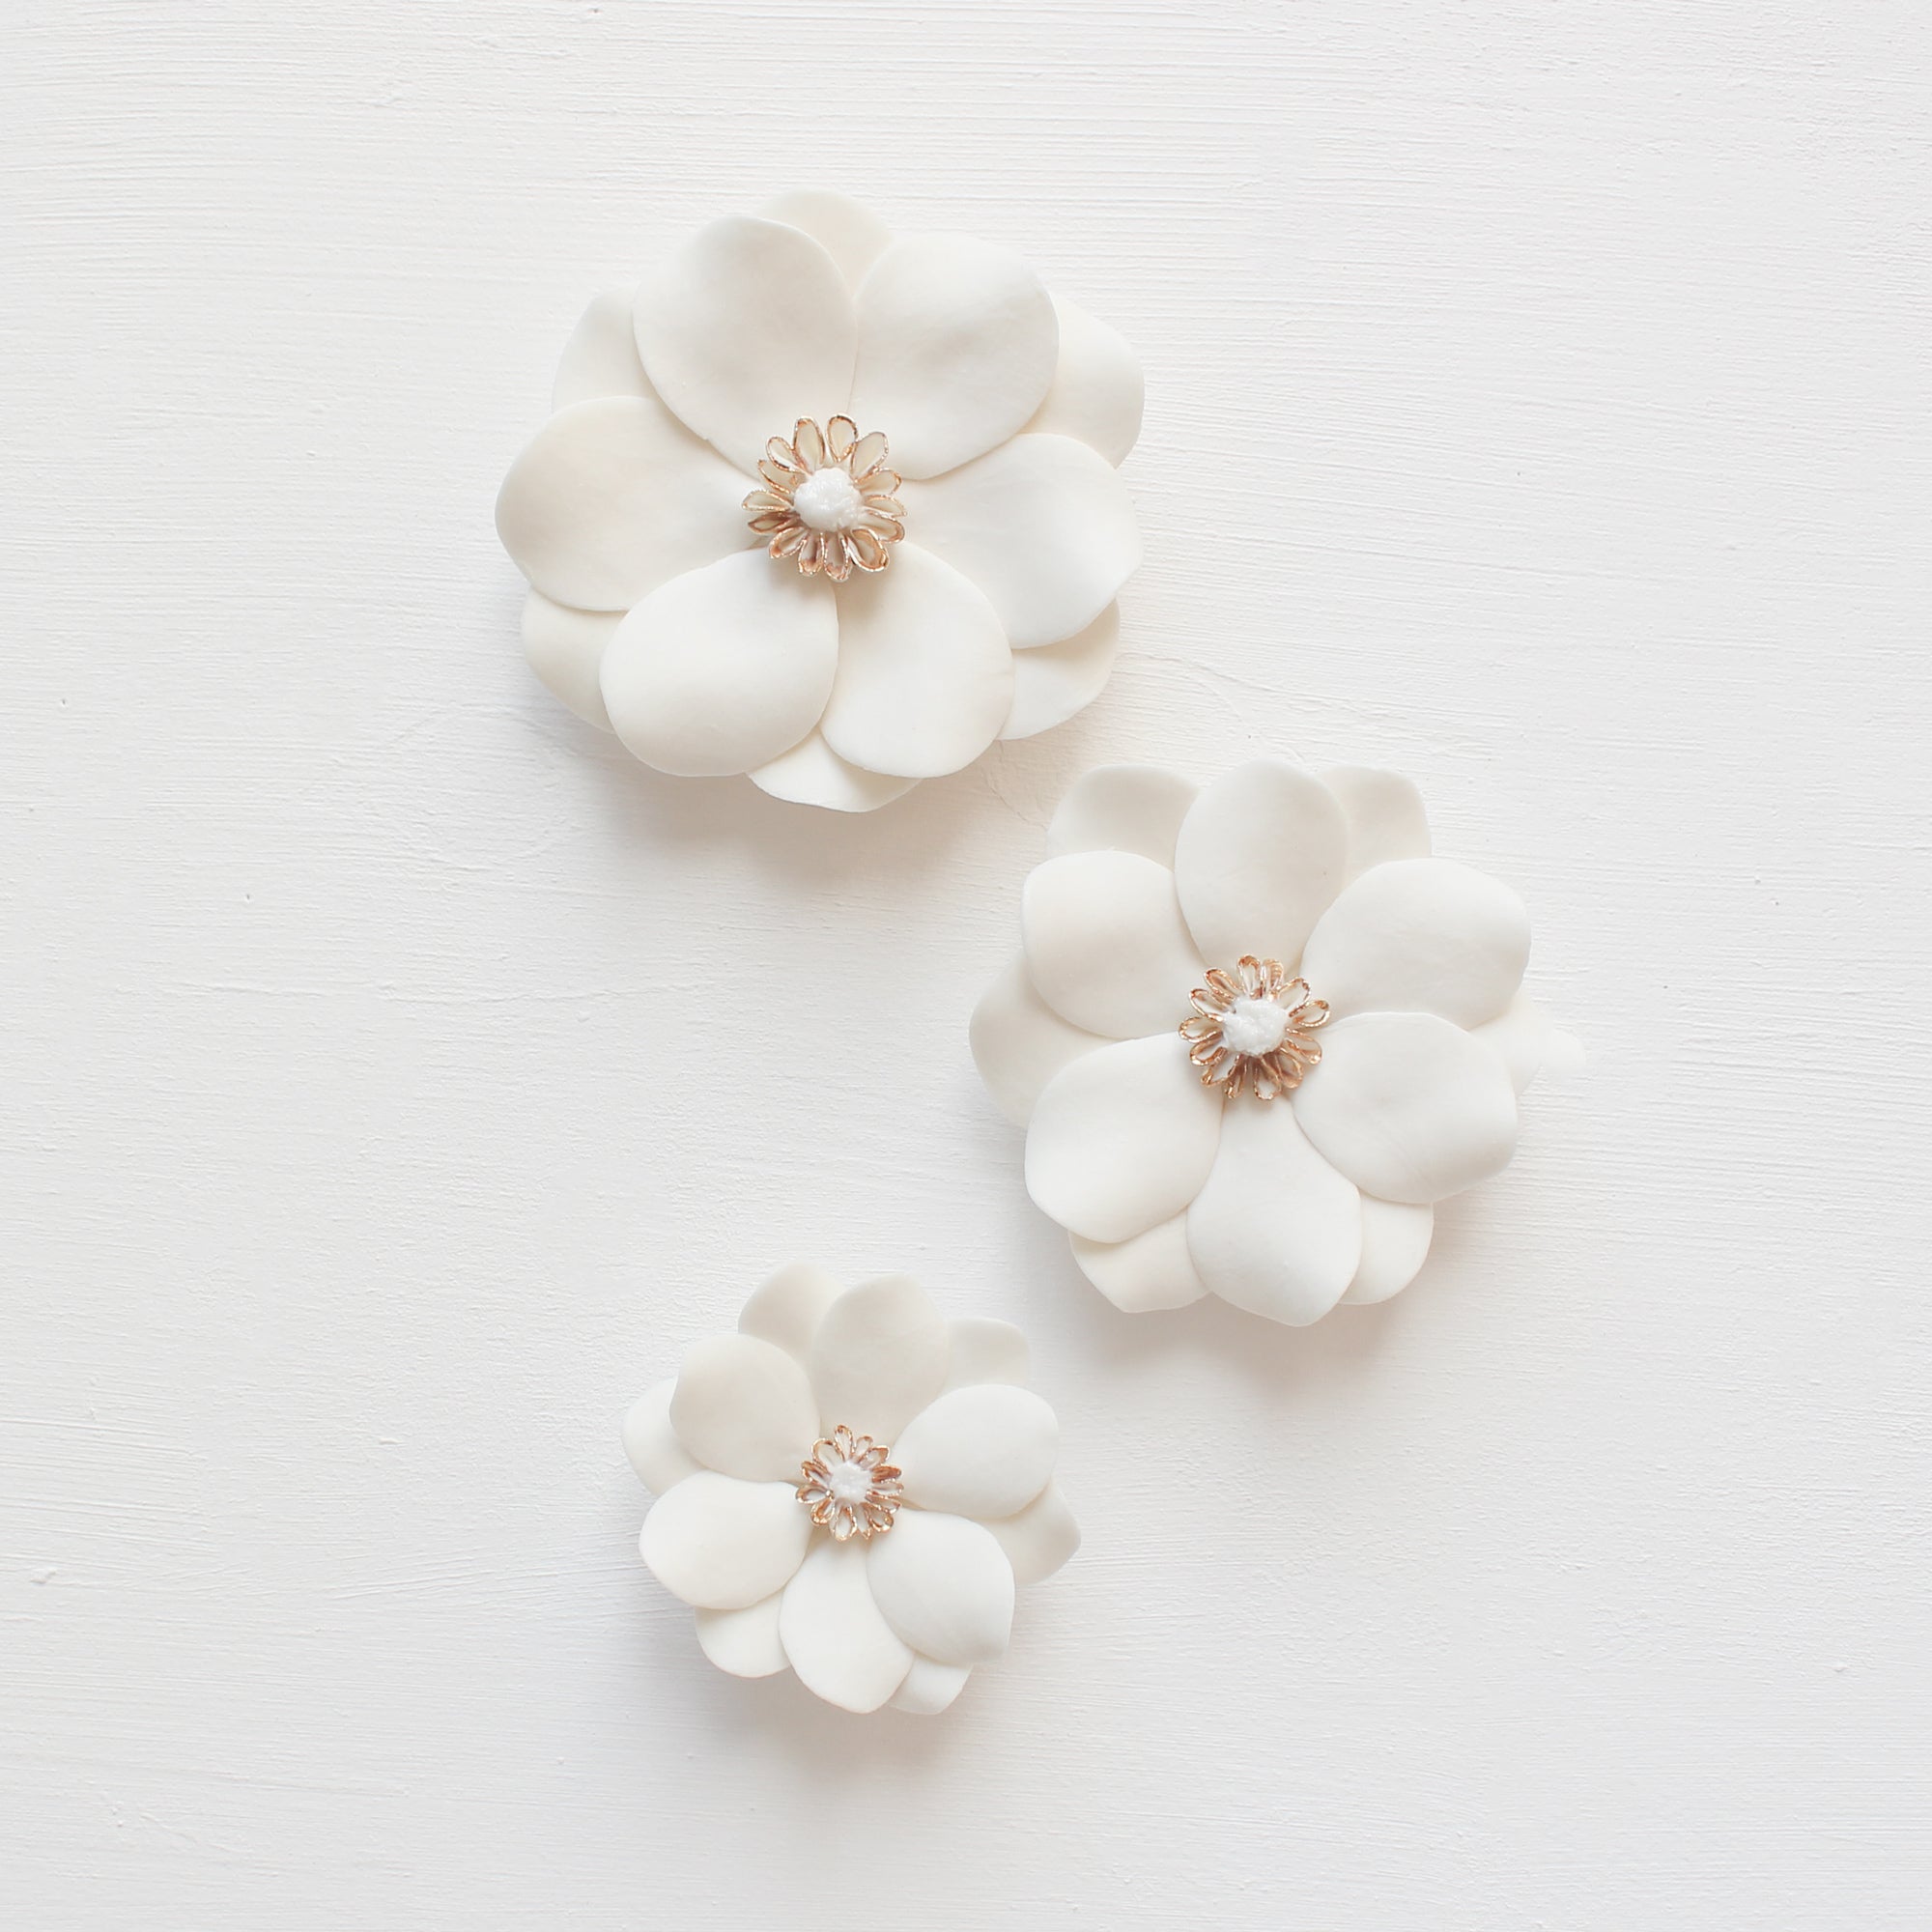 White and Gold Porcelain Flowers handmade in France by Alain Granell